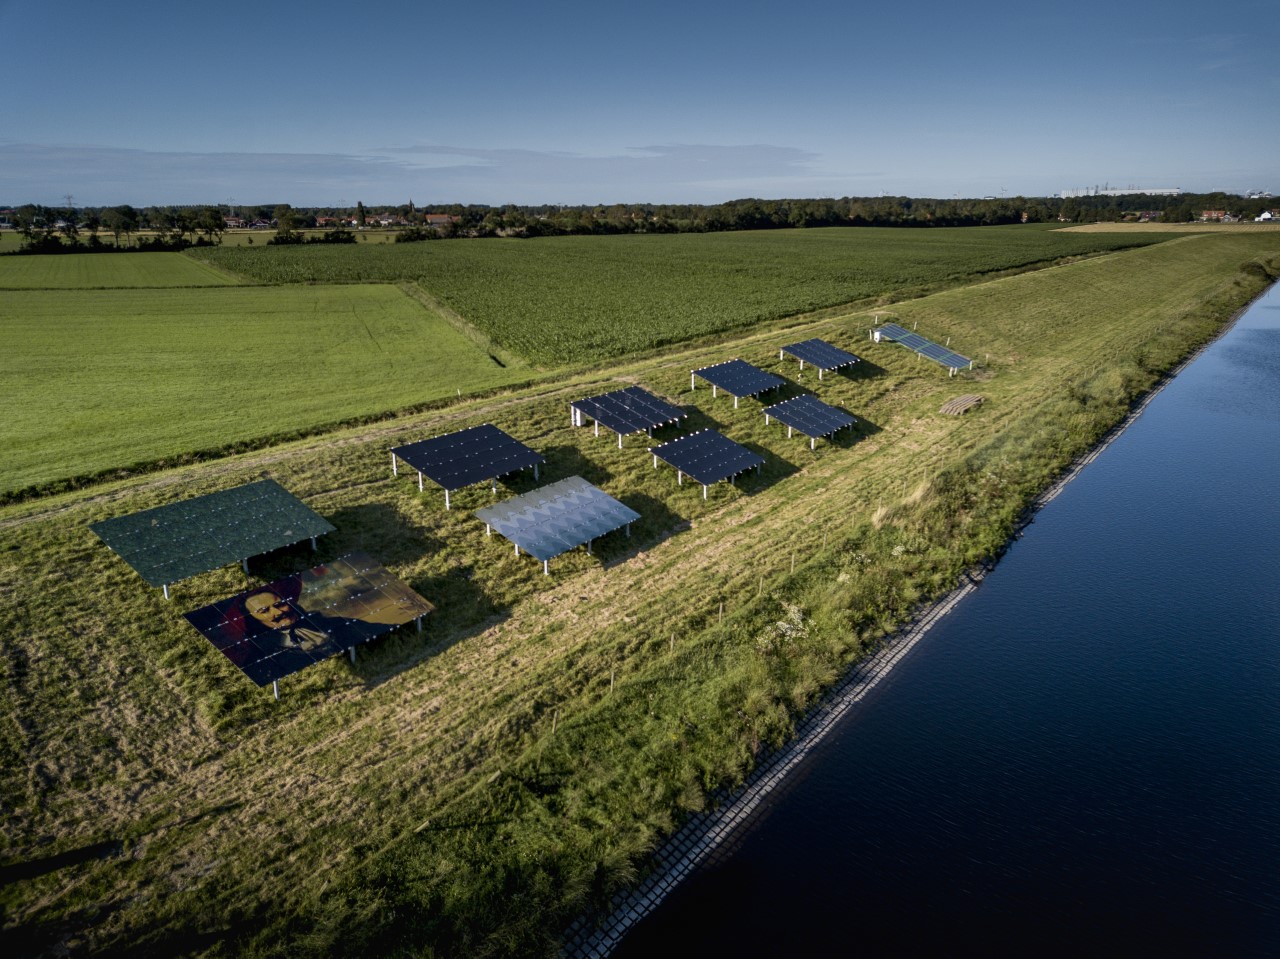 Challenging plans to deploy PV on dikes - pv magazine International